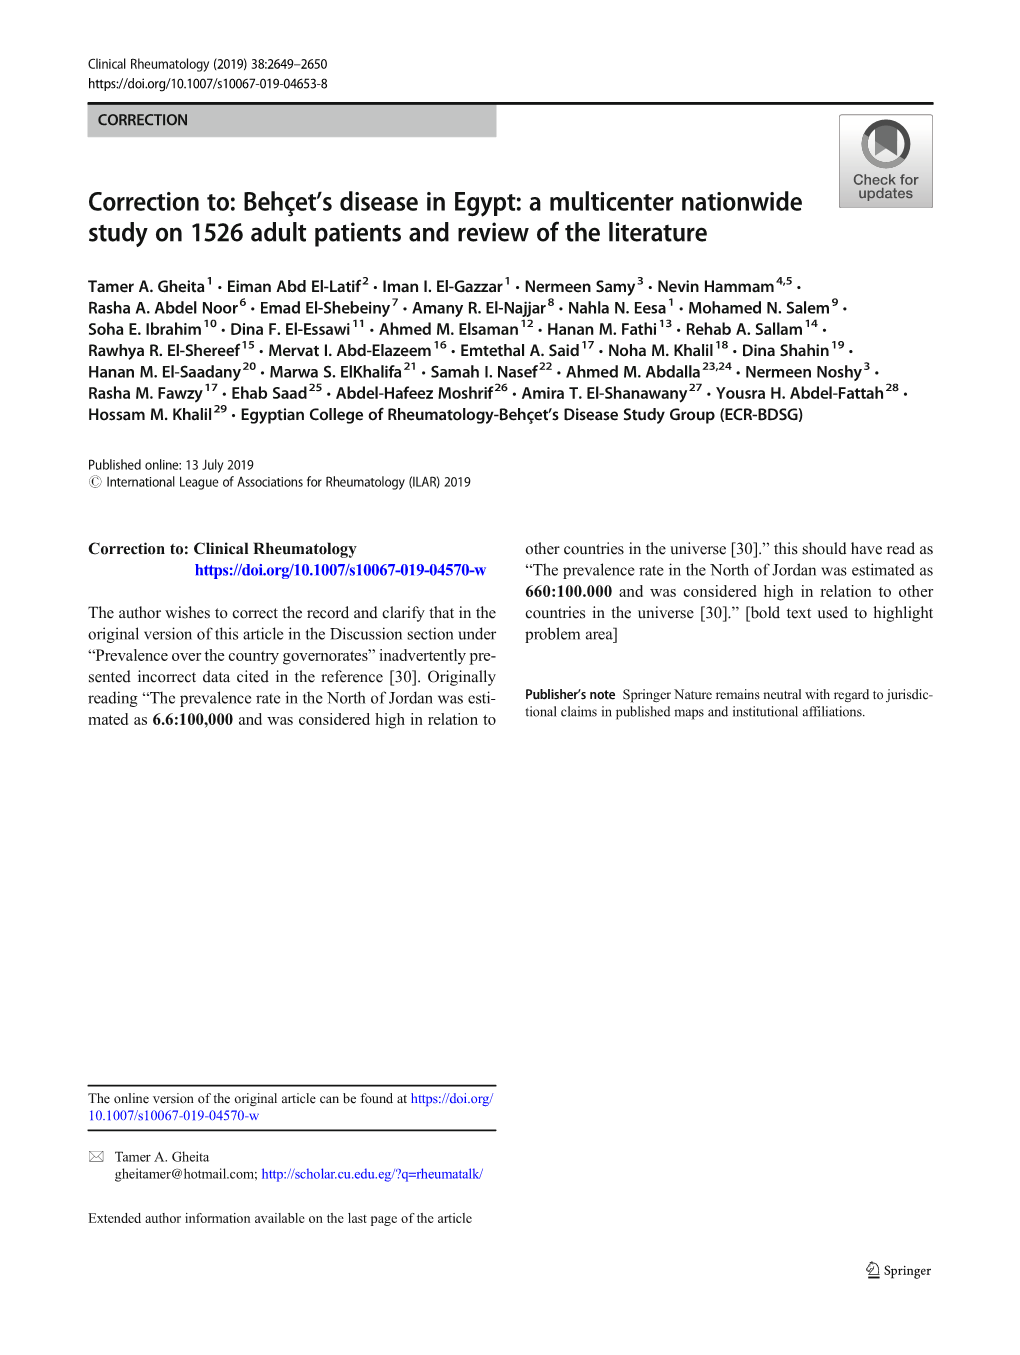 Correction To: Behçet's Disease in Egypt: a Multicenter Nationwide